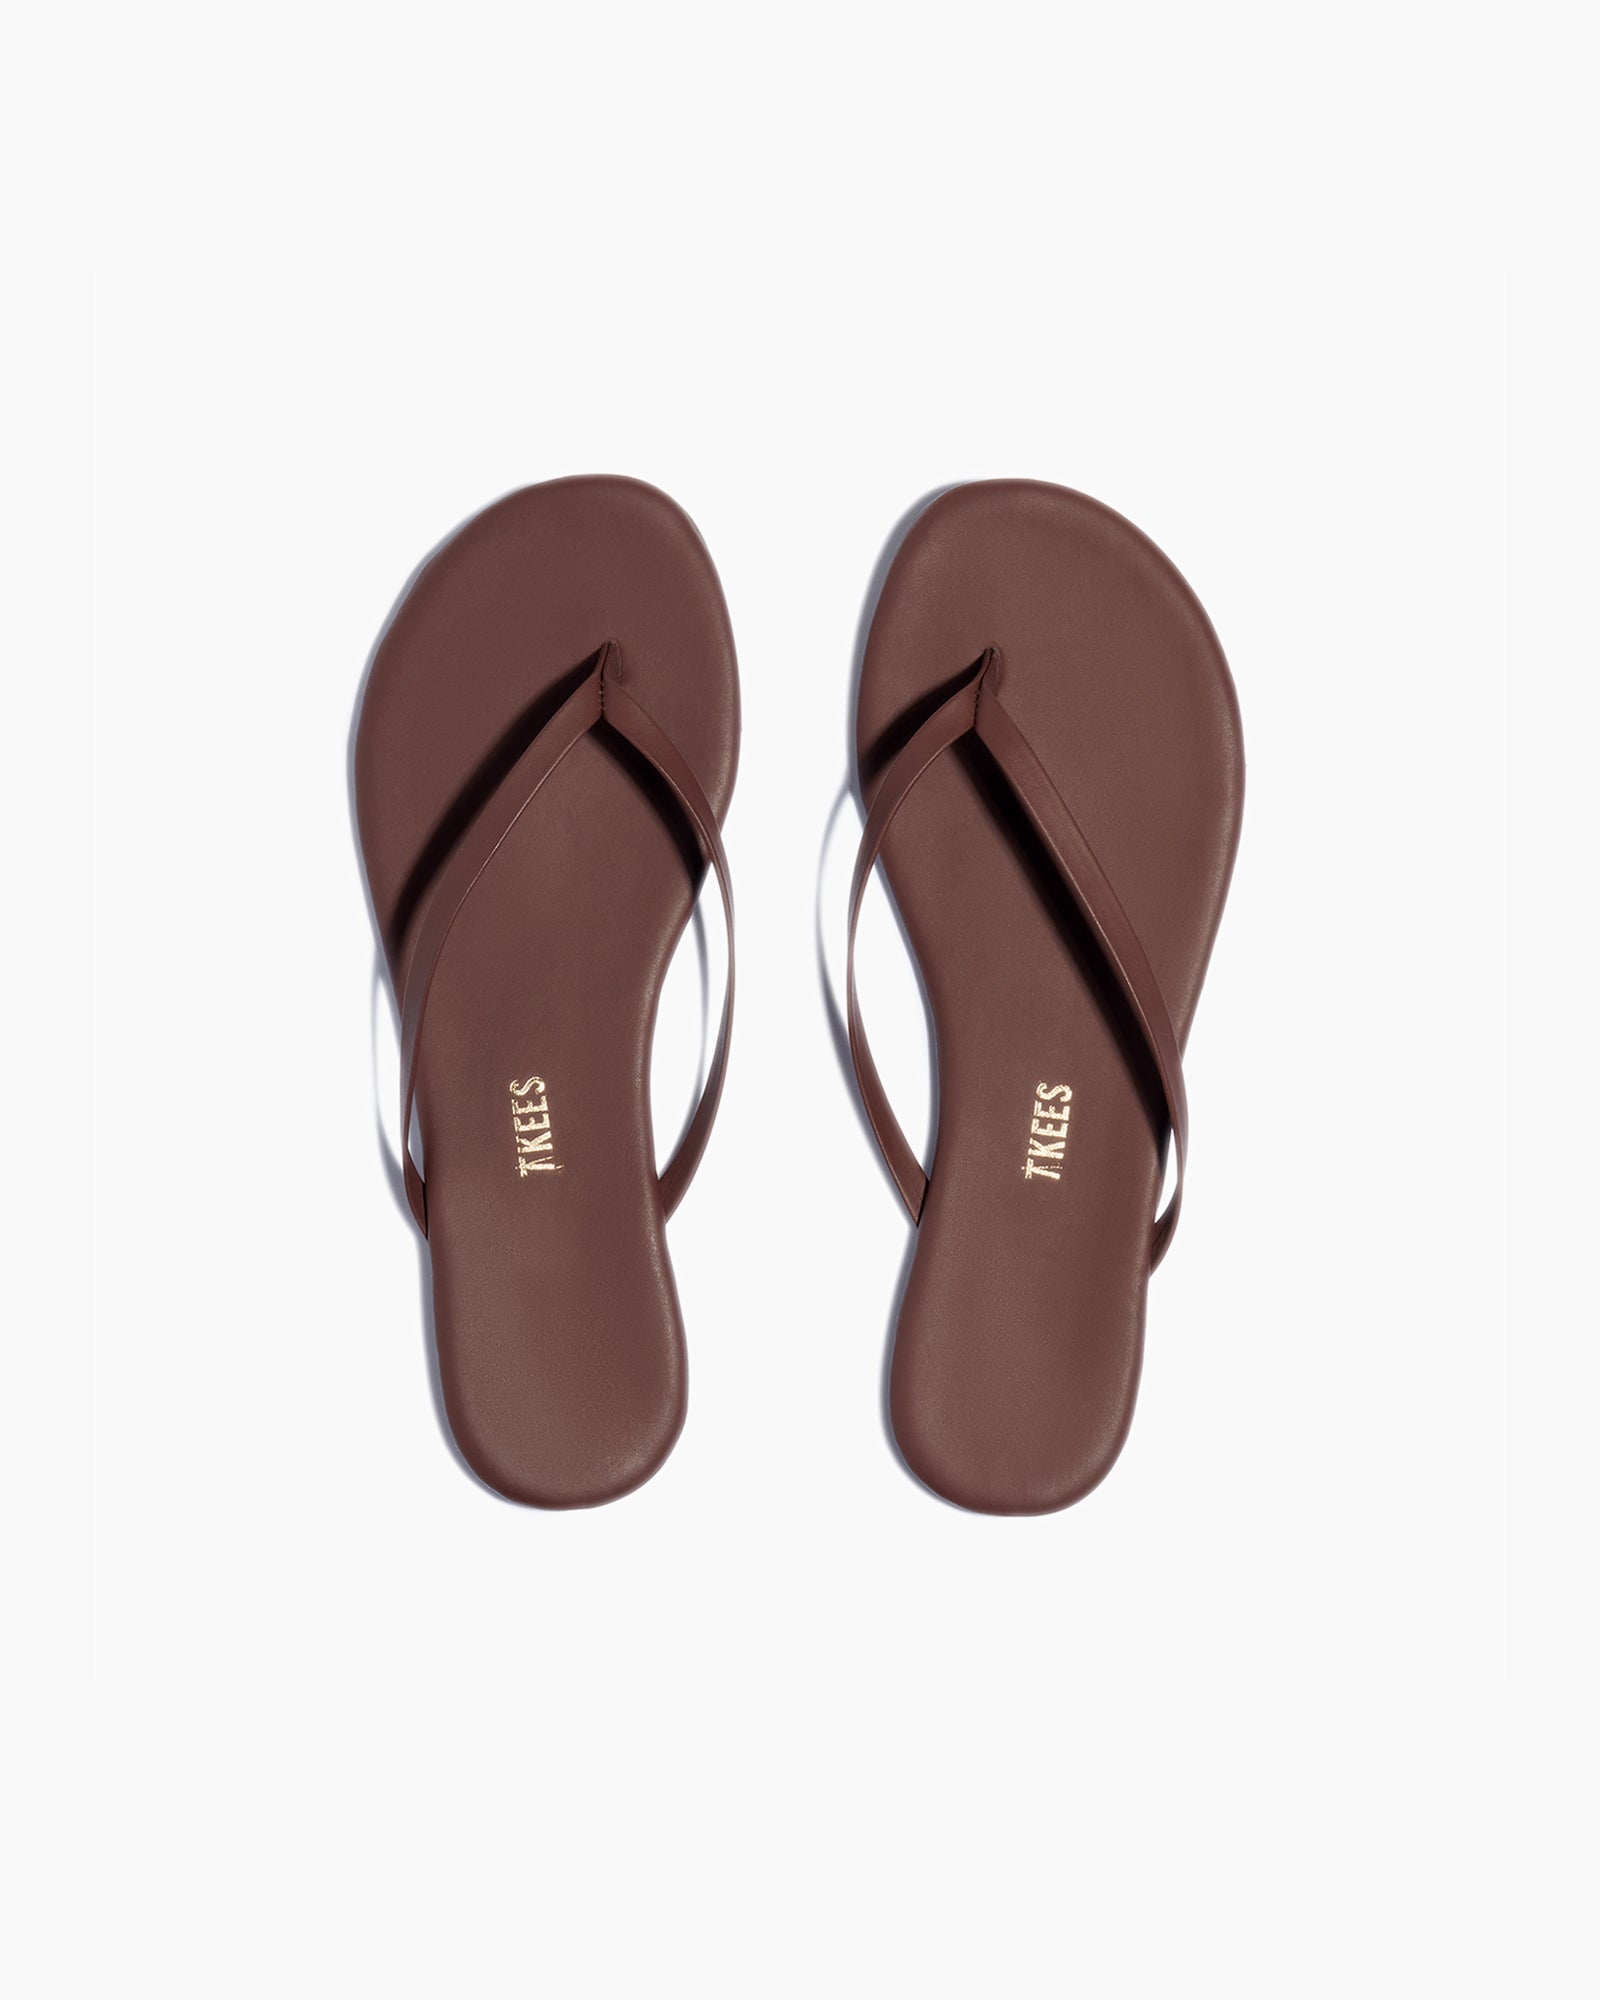 Brown Women\'s\'s\'s\'s\'s\'s\'s\'s\'s\'s\'s\'s\'s\'s\'s\'s\'s\'s\'s\'s\'s\'s TKEES Lily Nudes Flip Flops | DFZCWP709